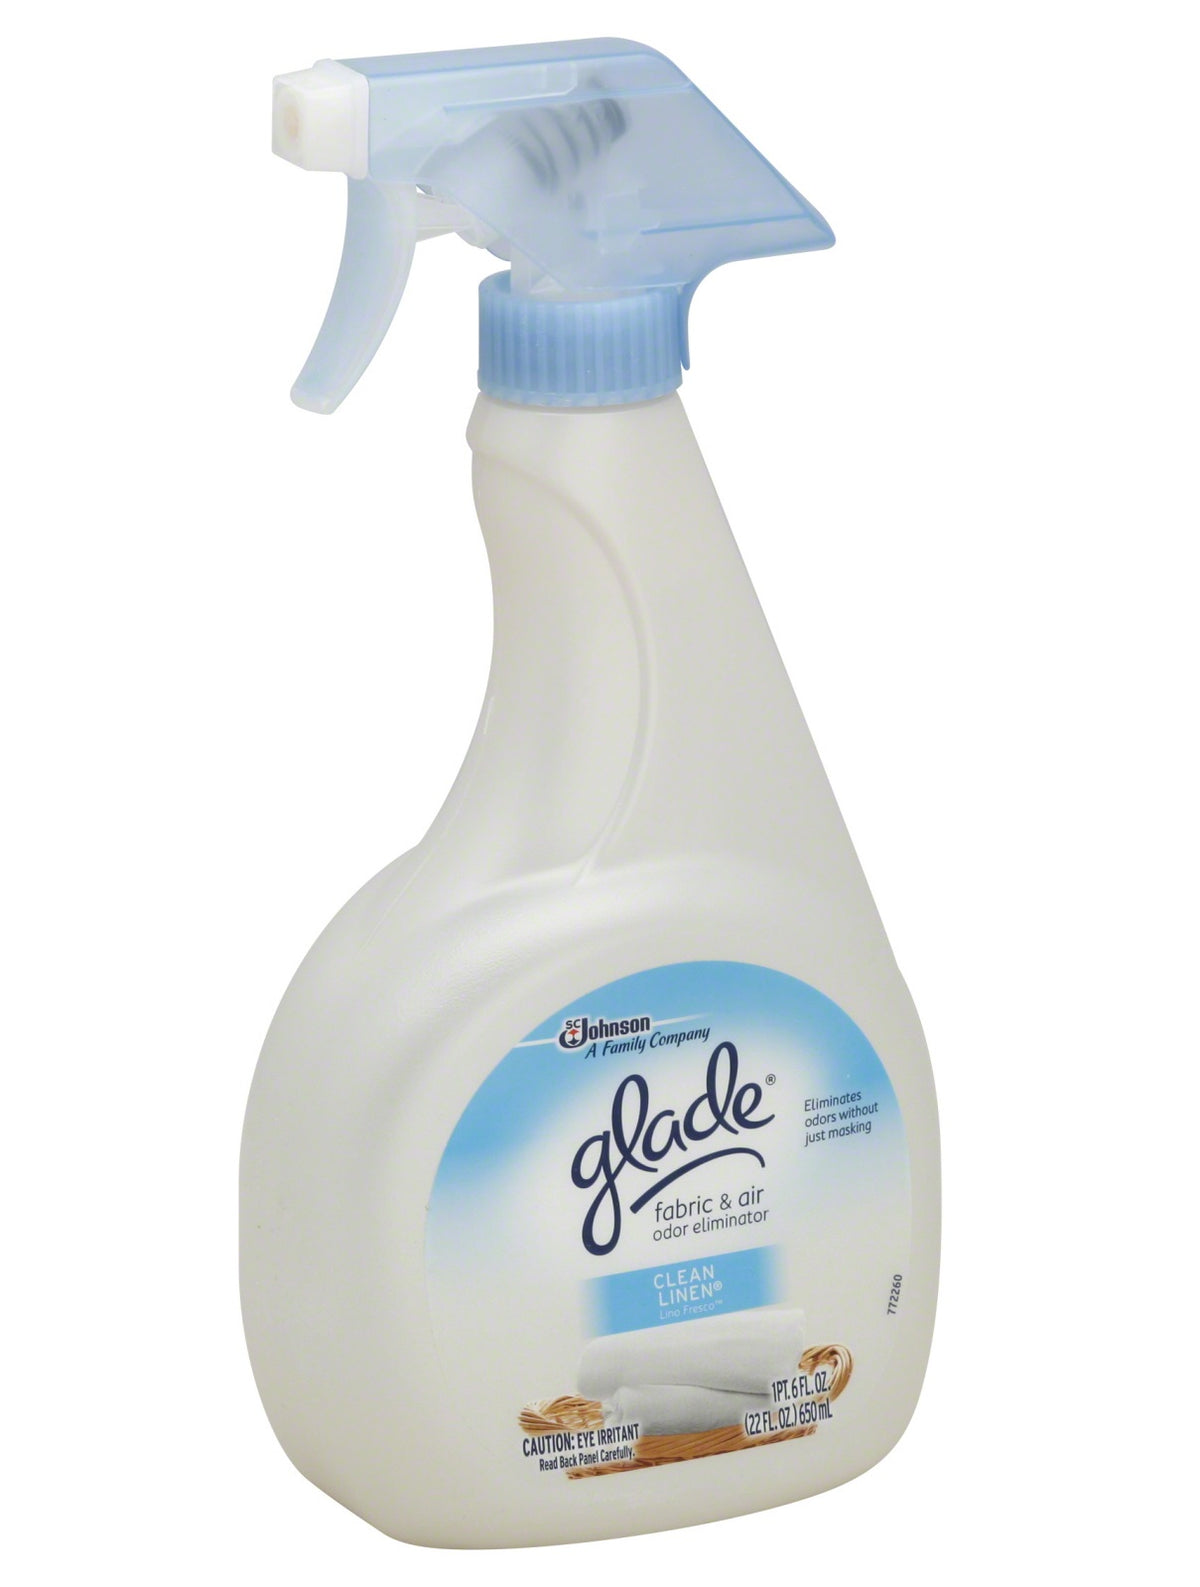 Glade 73566 Fabric And Air Odor Elimination, Clean Linen, 22 Oz.